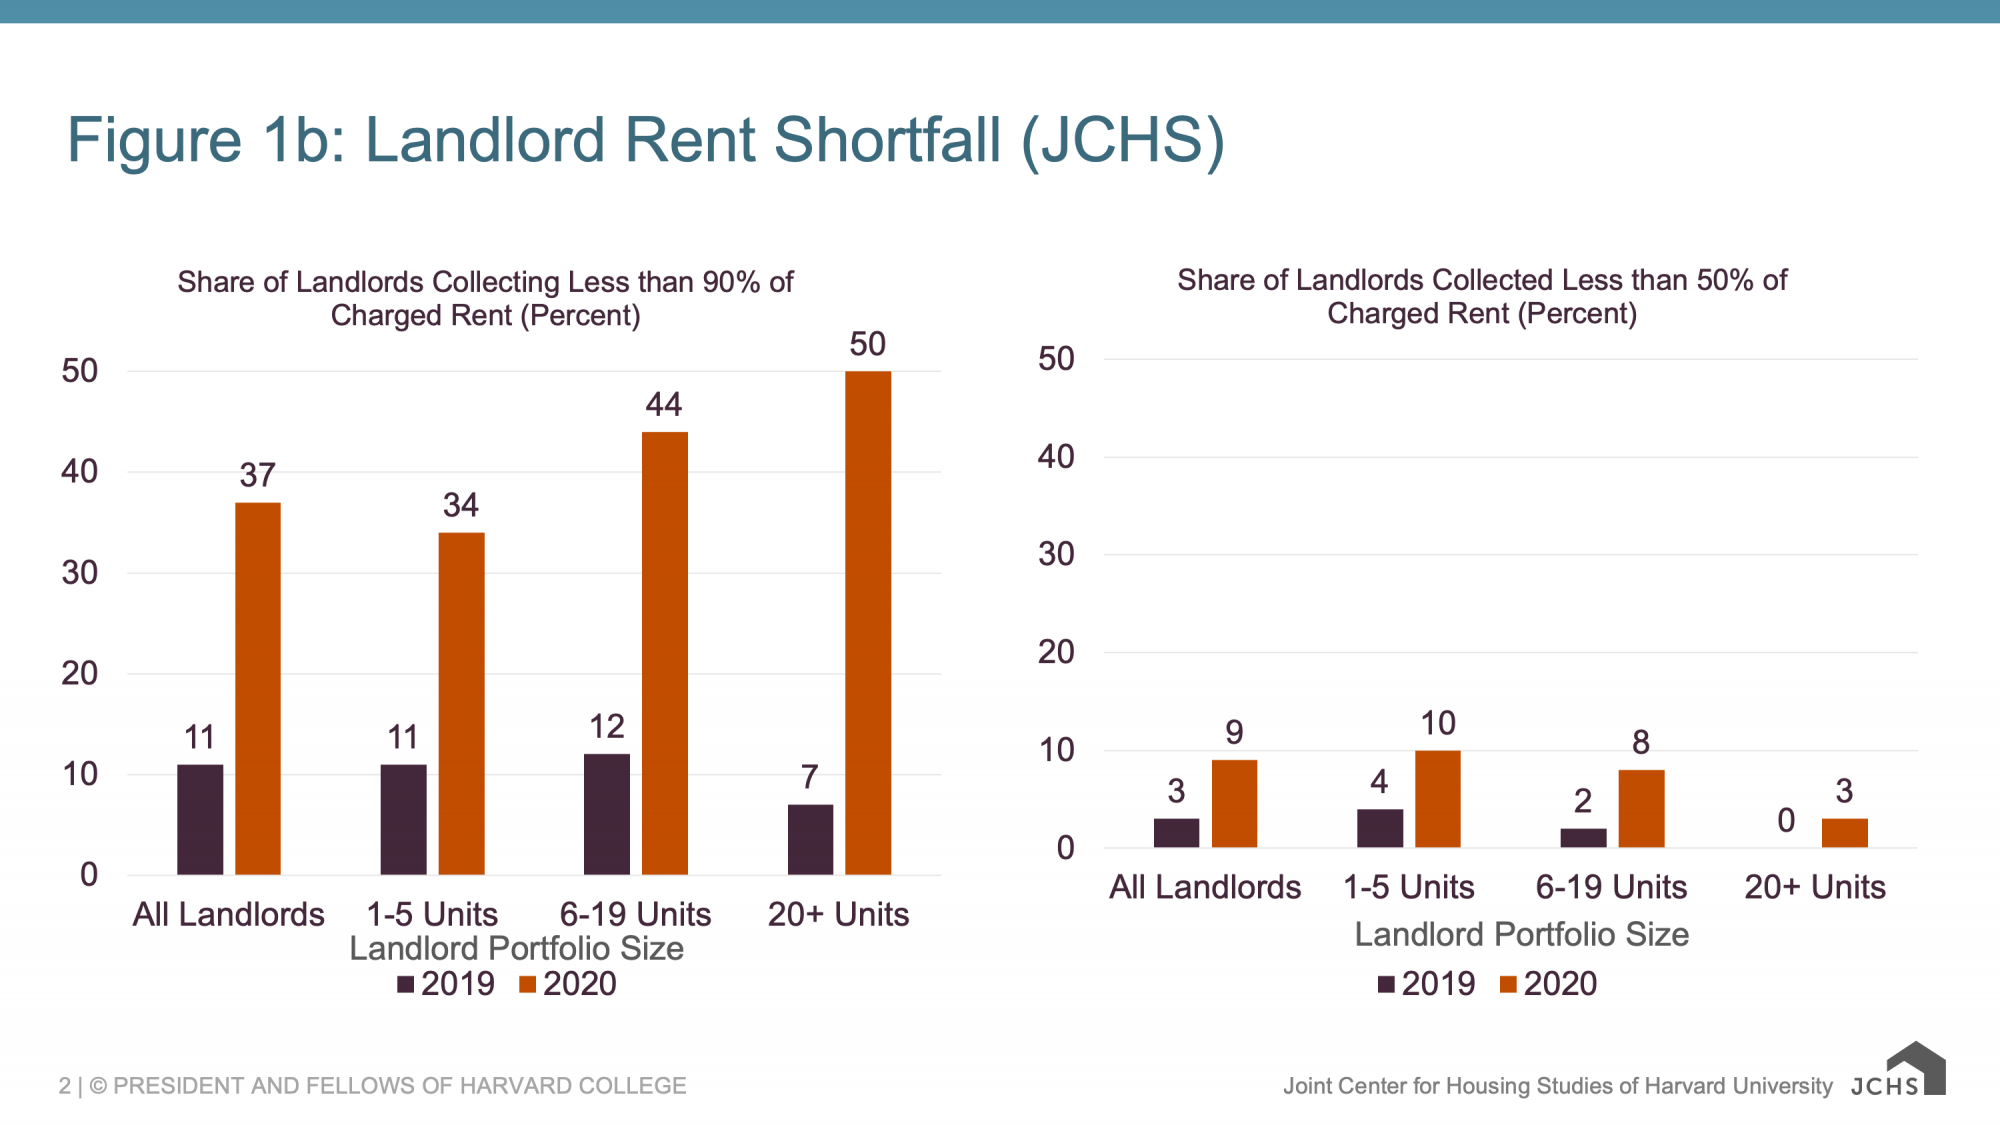 Rent collected in 2020 as share of 2019 rent based on landlord portfolio size.